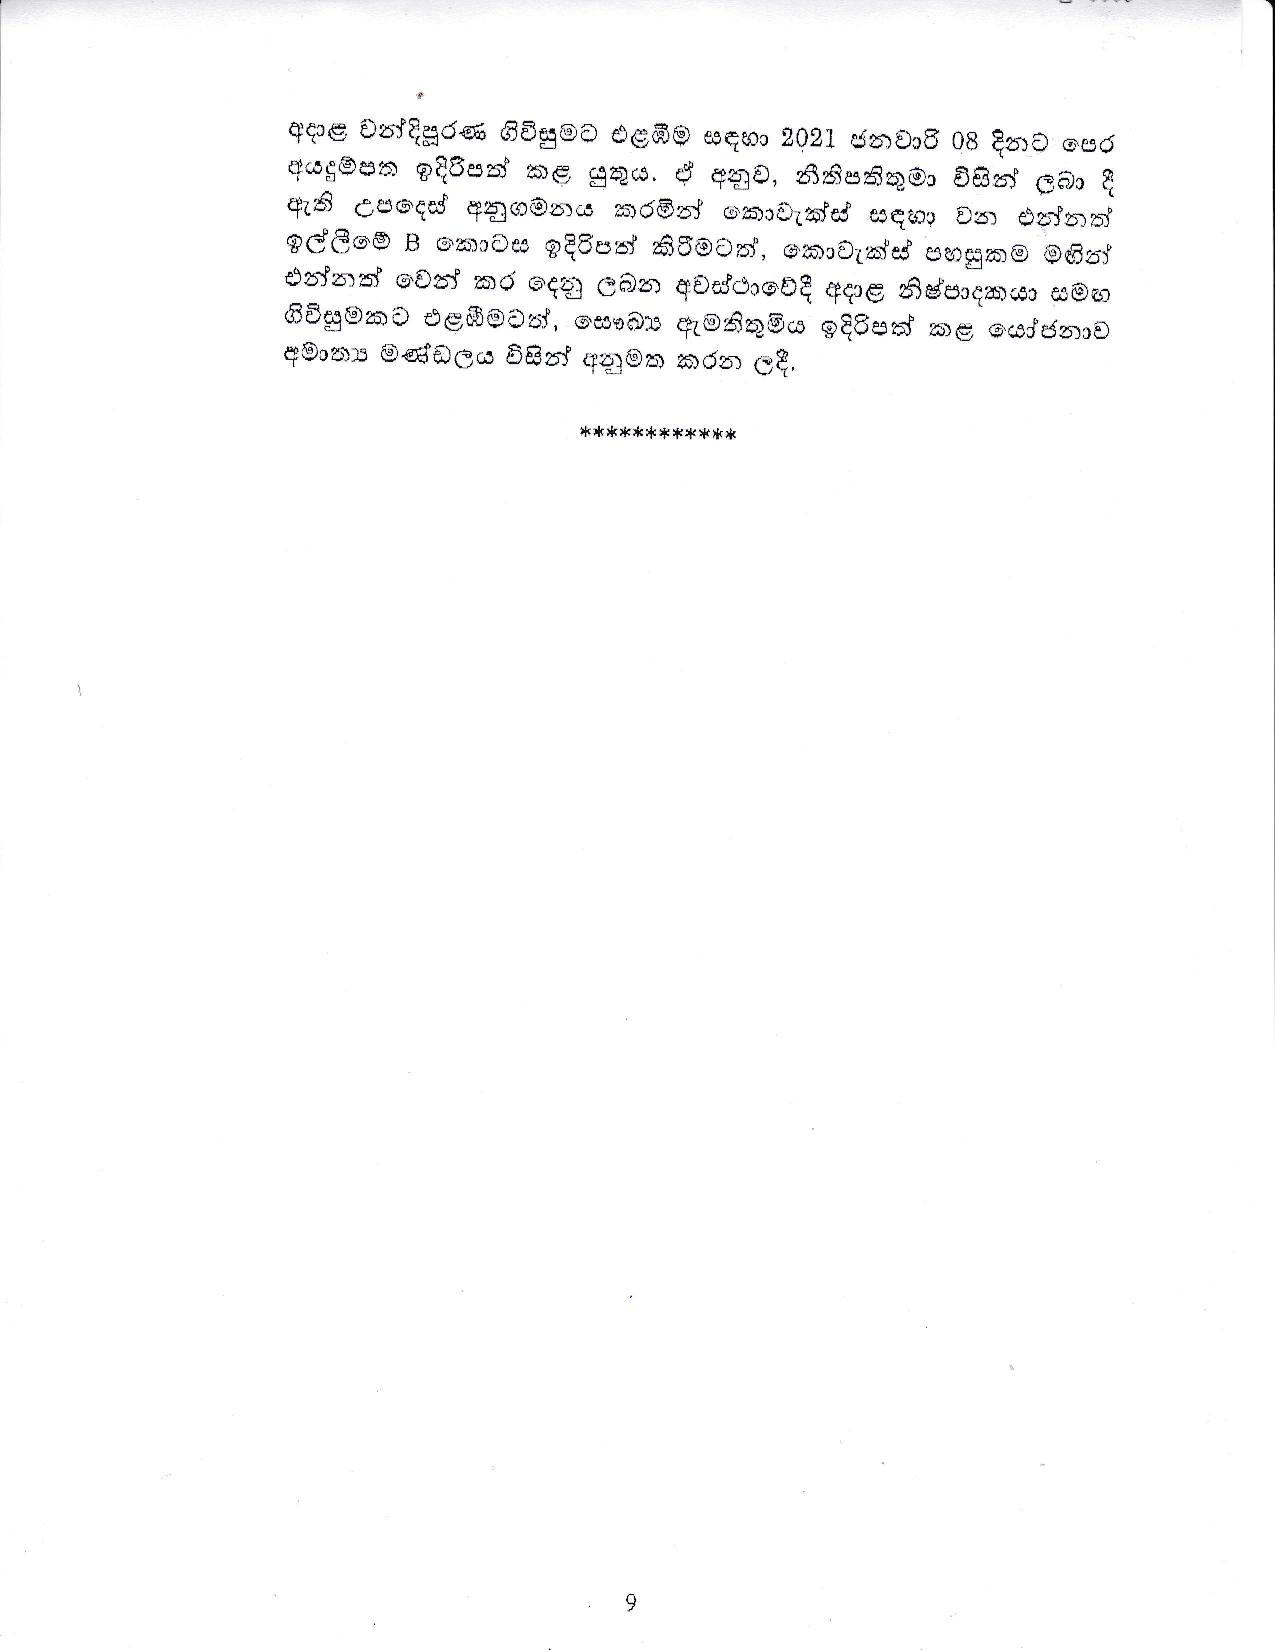 Cabinet Decision on 04.01.2021 page 009